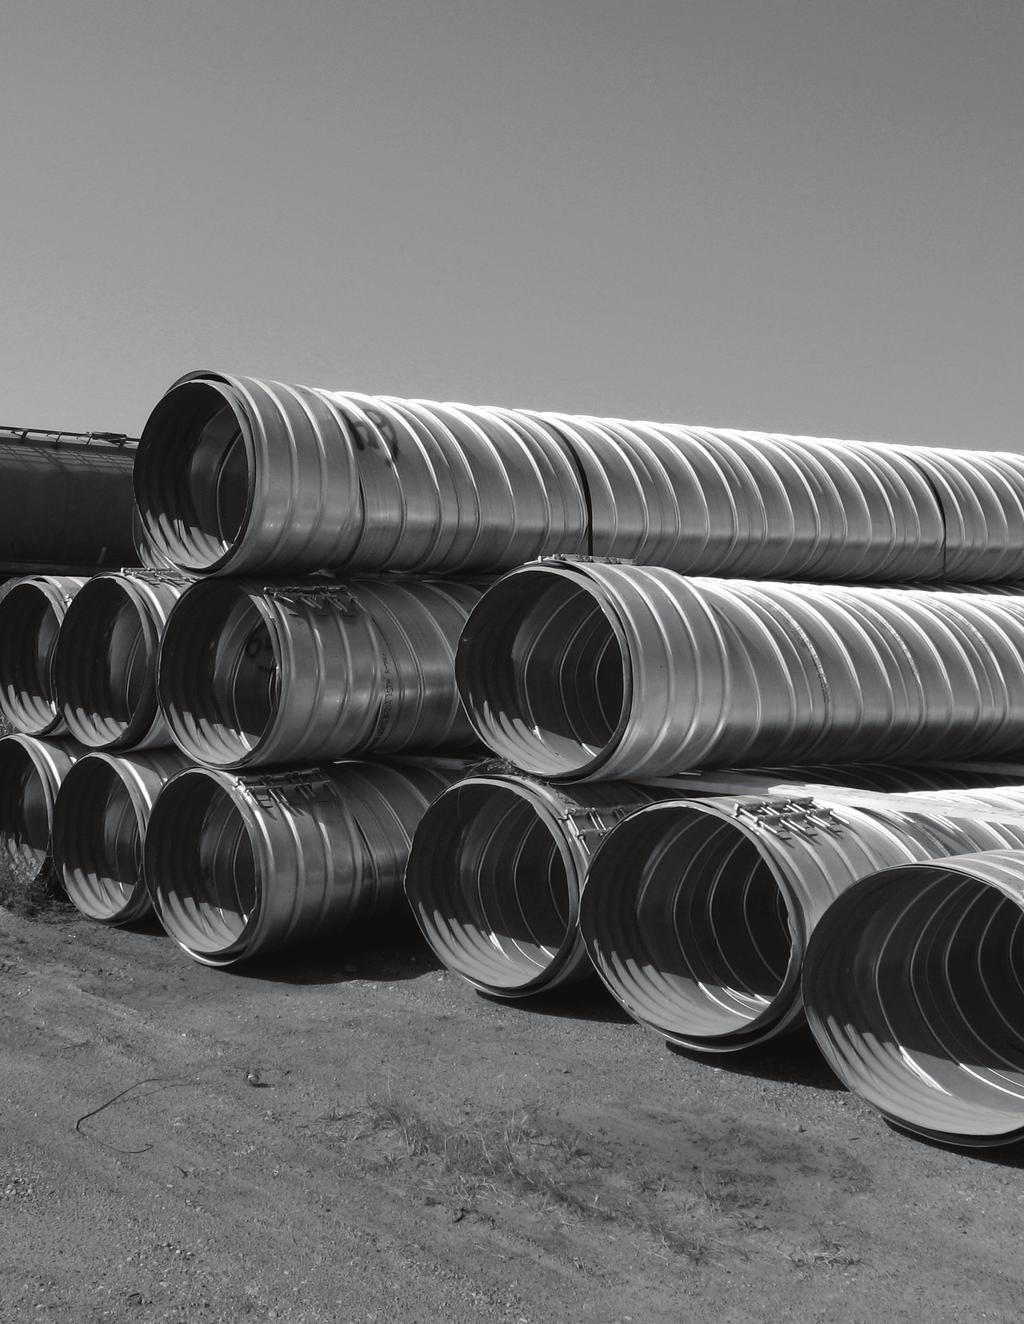 DRAINAGE SOLUTIONS SINCE 1908 ULTRA FLO STEEL PIPE PRODUCT GUIDE LARGE-DIAMETER STORM SEWER PIPE DELIVERS